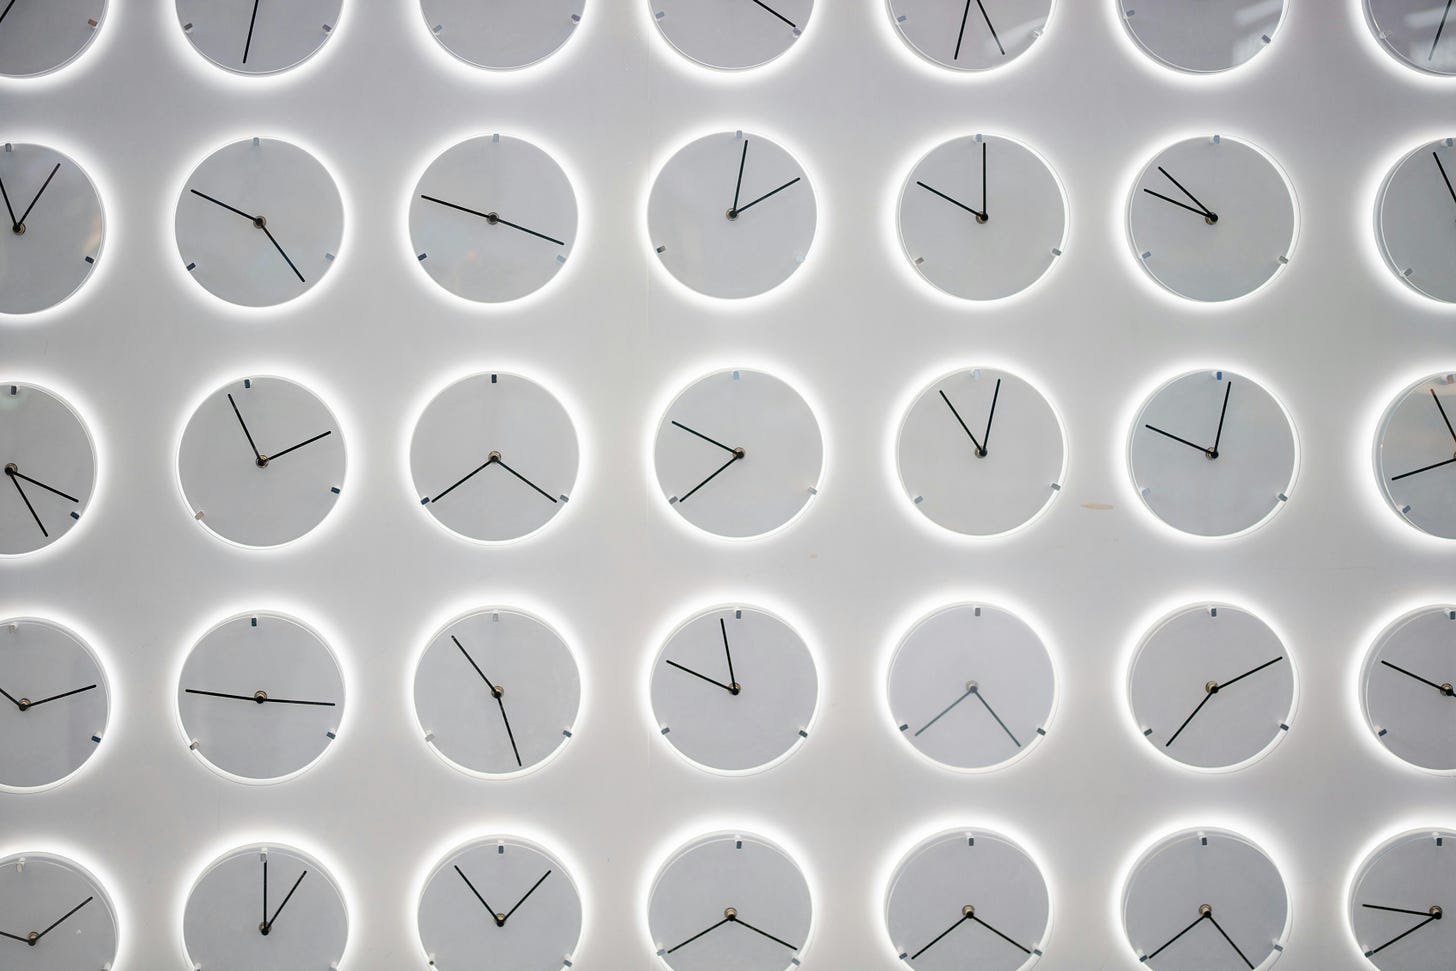 white clocks with black hands in rows and columns all showing different times